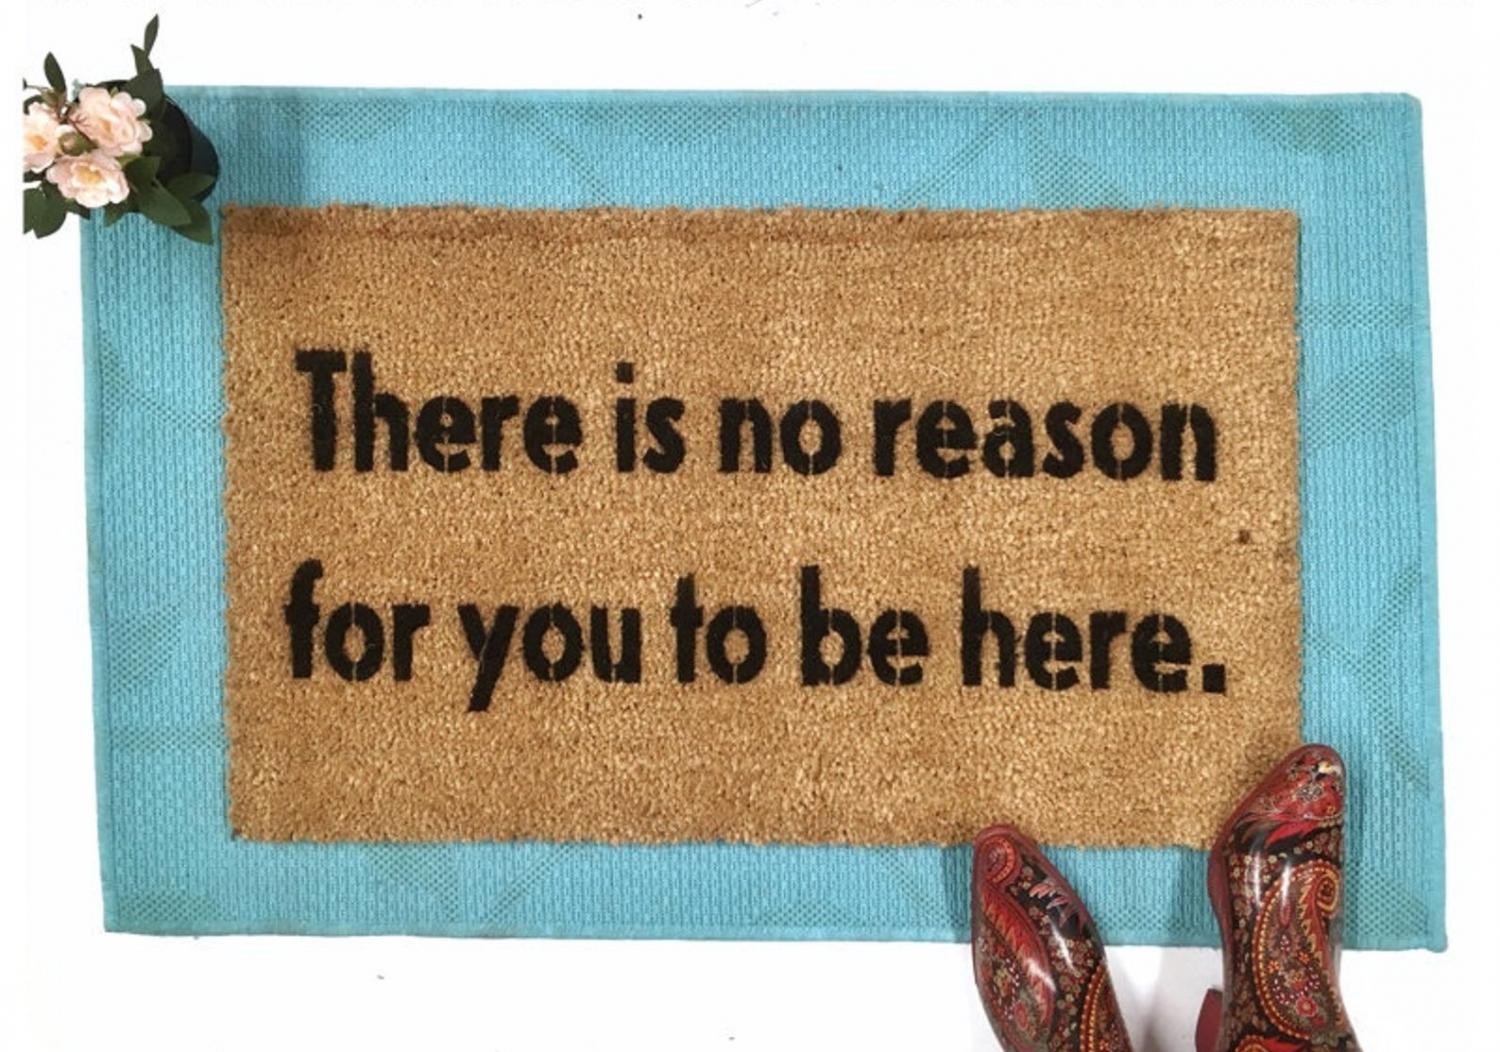 There Is No Reason For You To Be Here Doormat